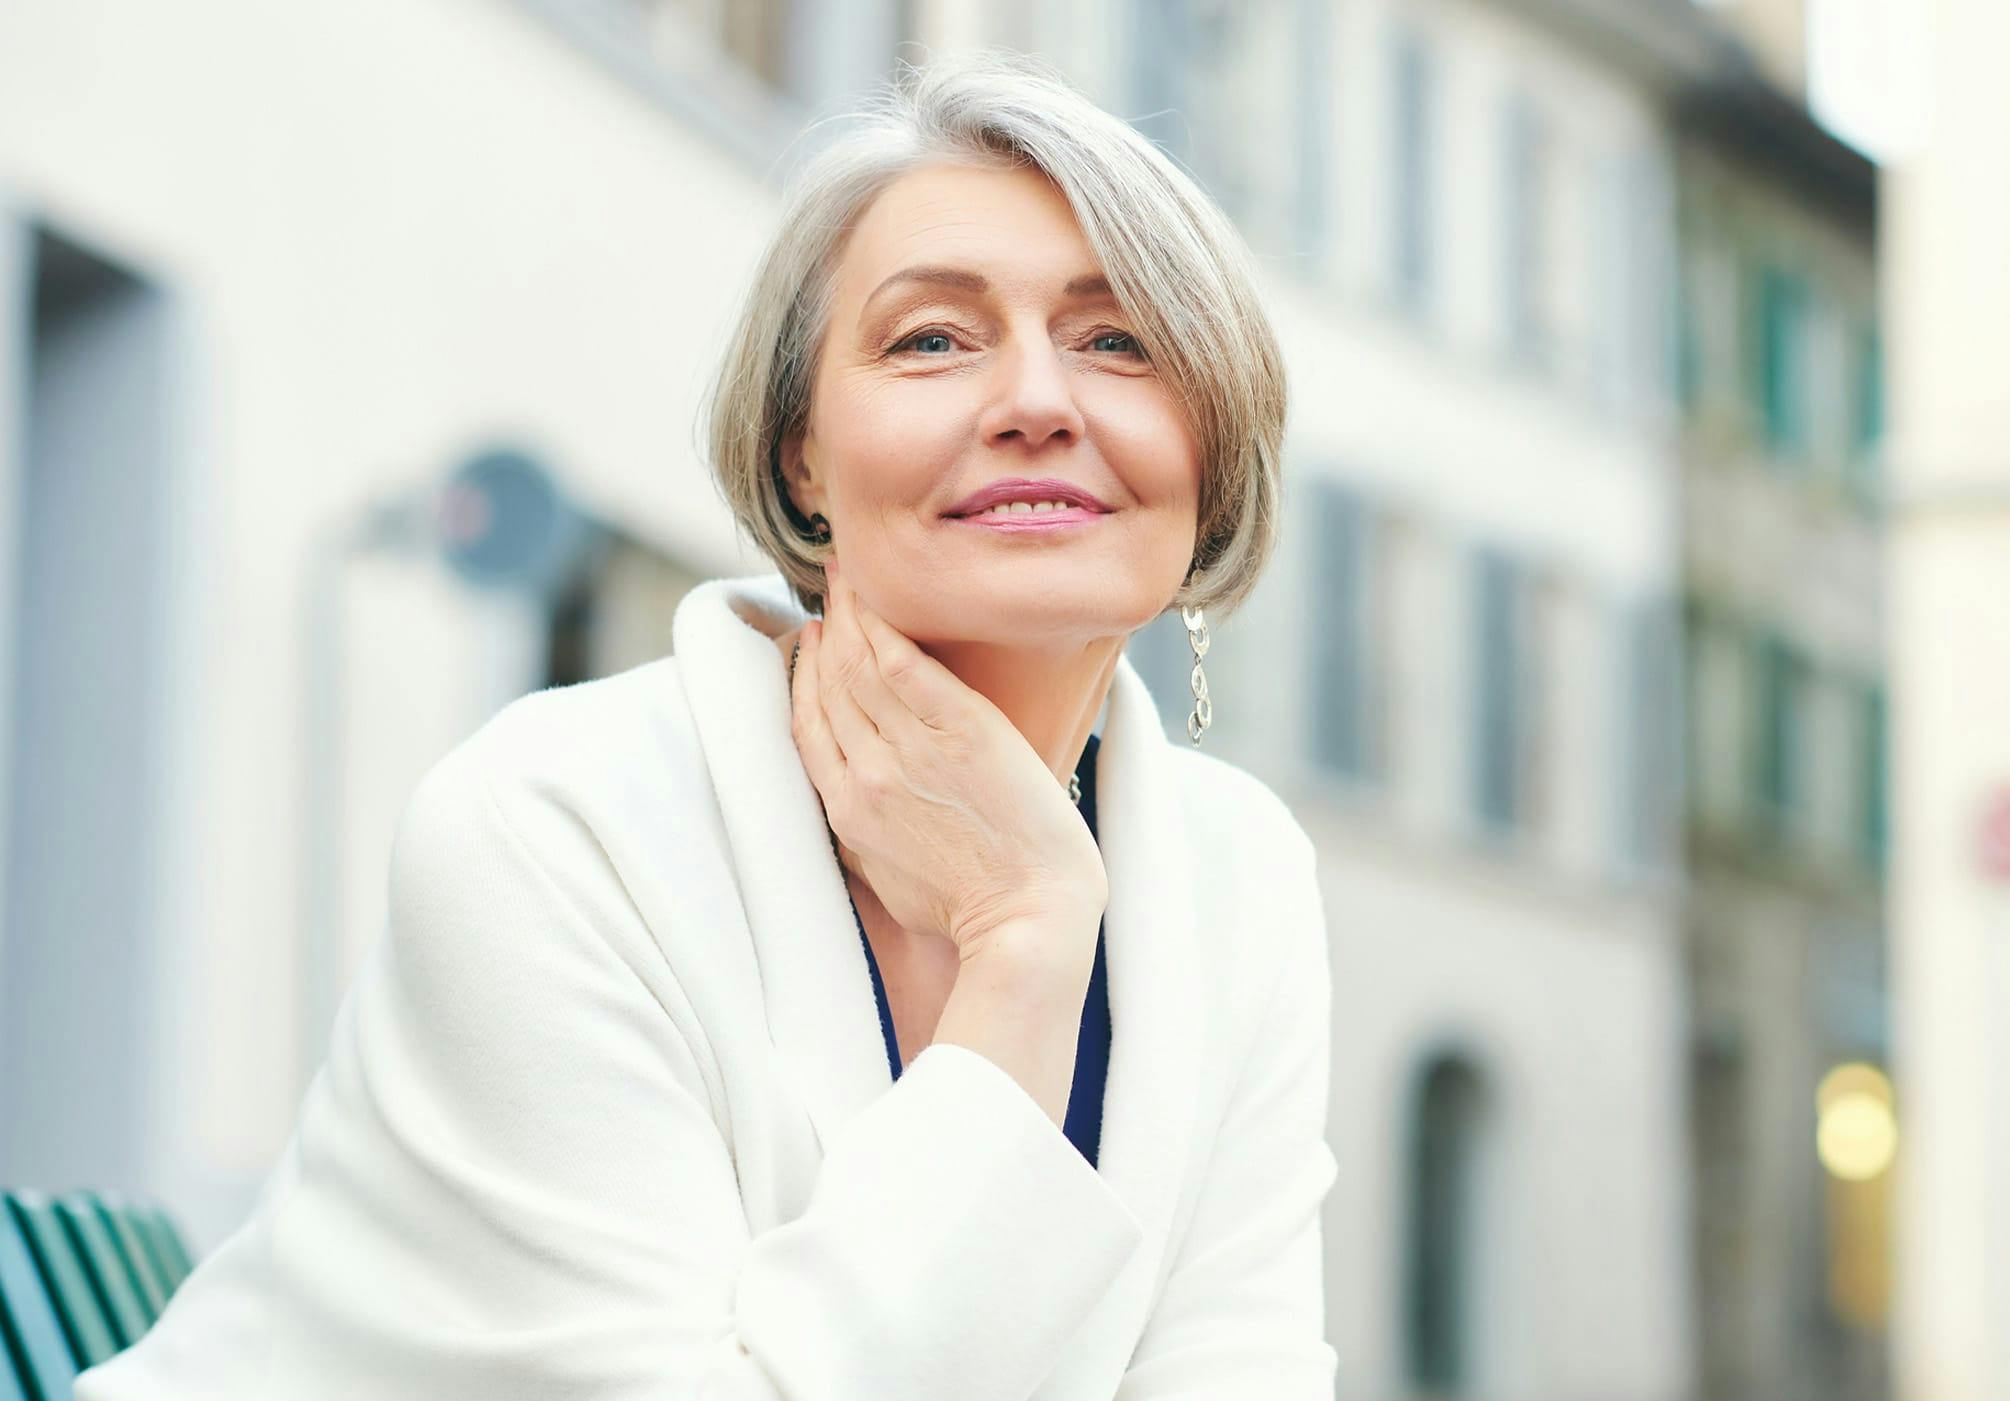 Woman with short grey hair